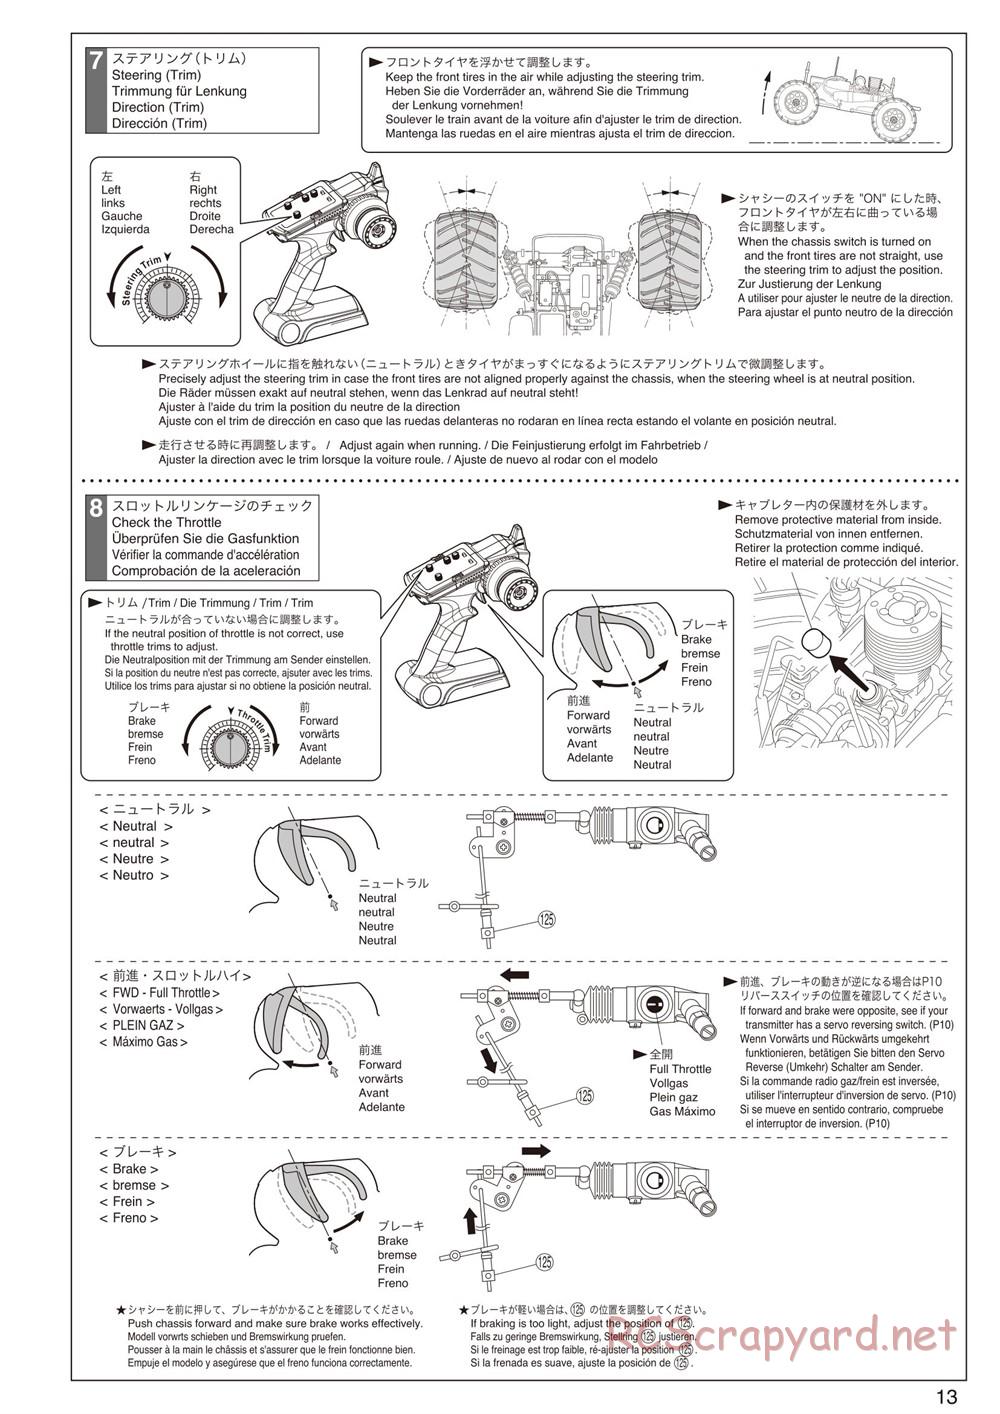 Kyosho - Mad Force Cruiser - Manual - Page 13